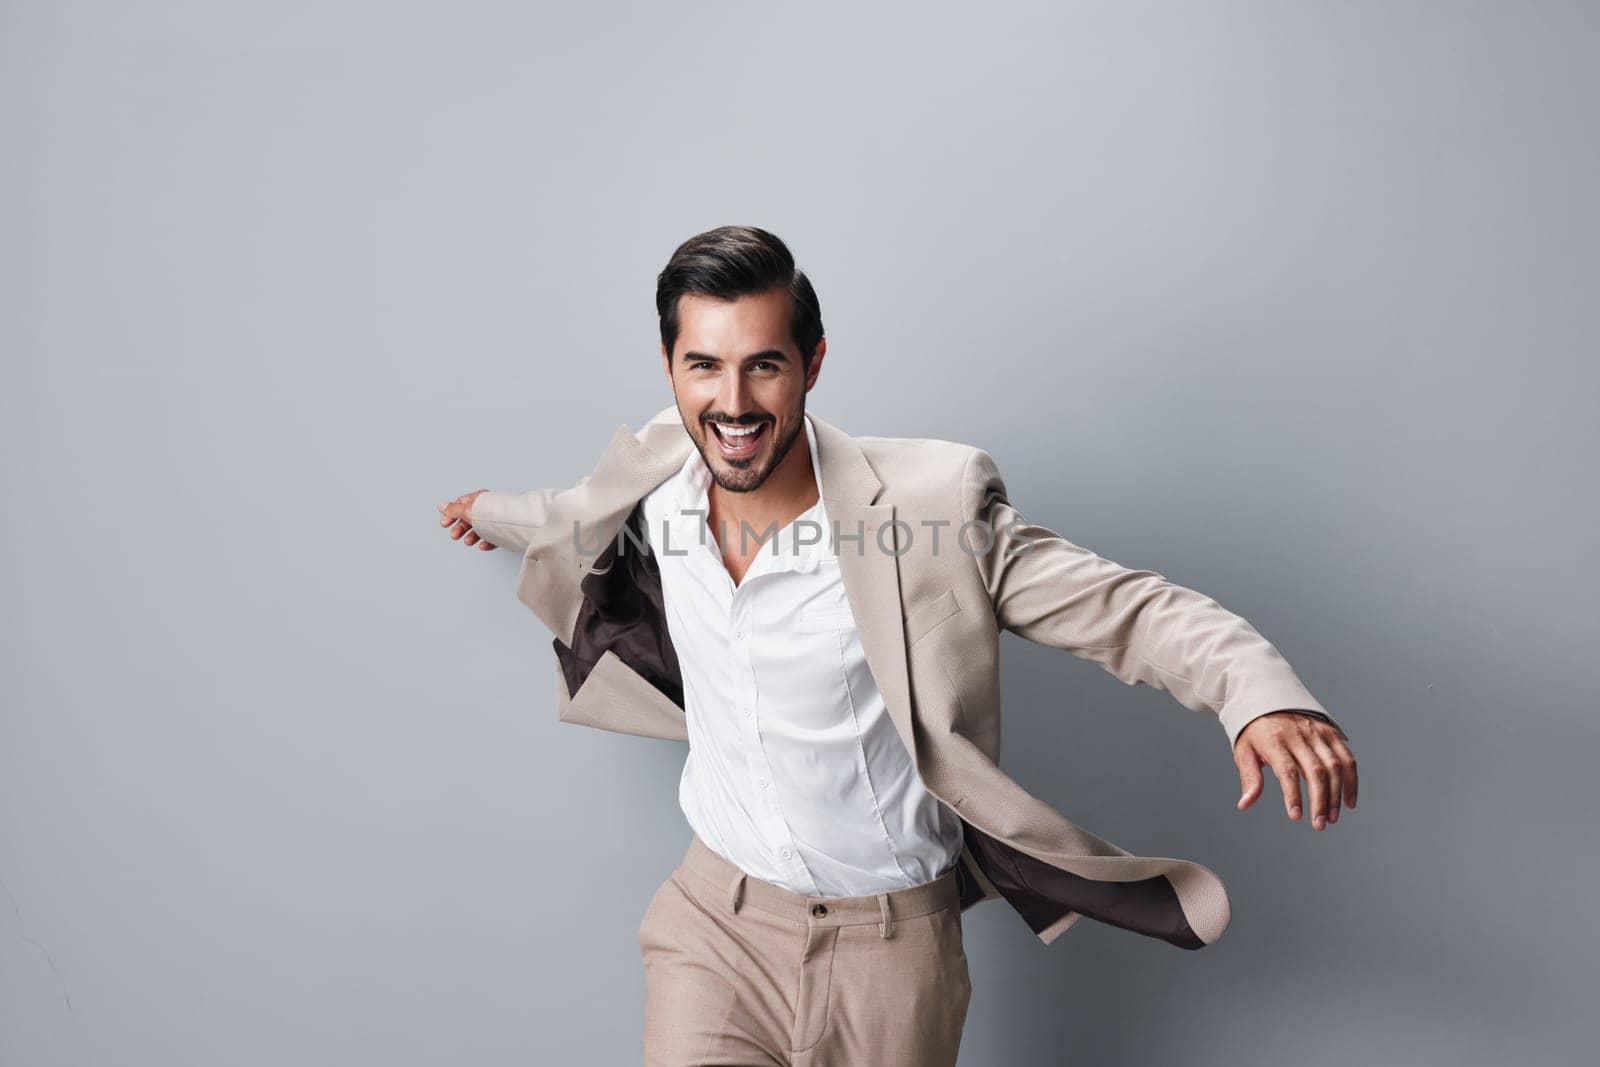 man background flying jacket winner business occupation businessman happy beard tie arm hand flying studio success running suit confident victory beige cheerful